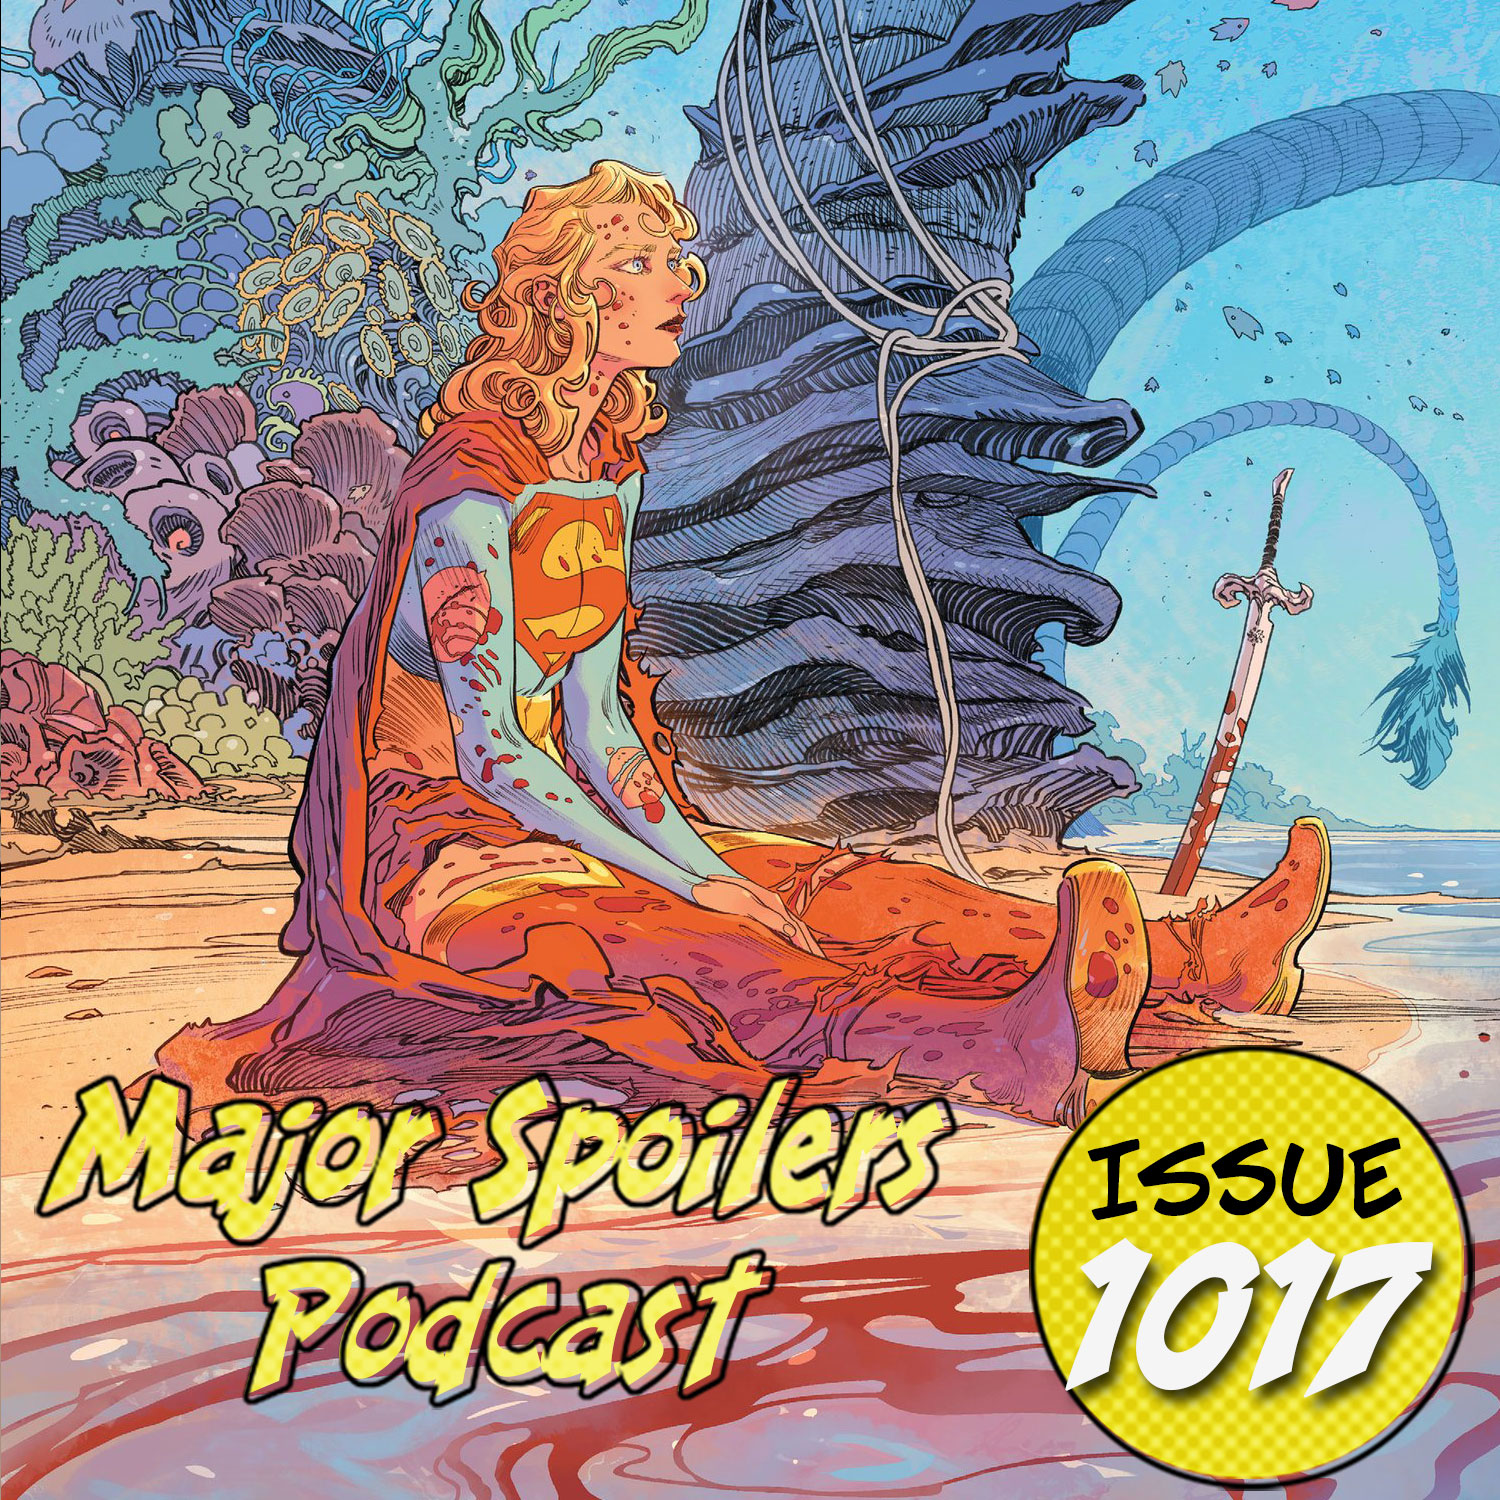 Major Spoilers Podcast #1017: The Woman of Tomorrow Podcast